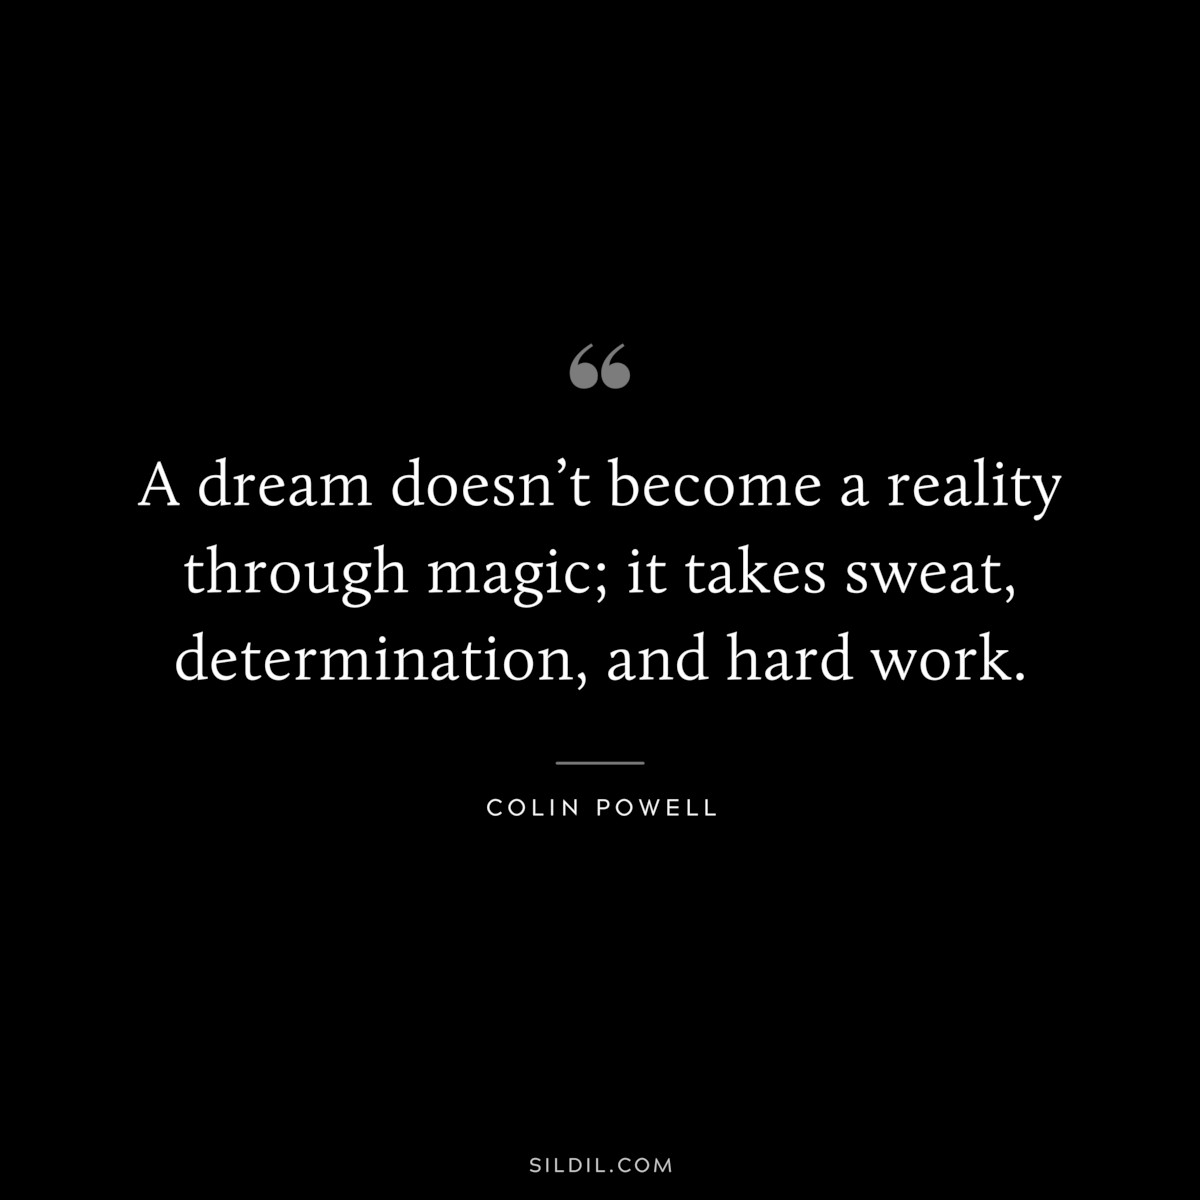 A dream doesn’t become a reality through magic; it takes sweat, determination, and hard work. ― Colin Powell